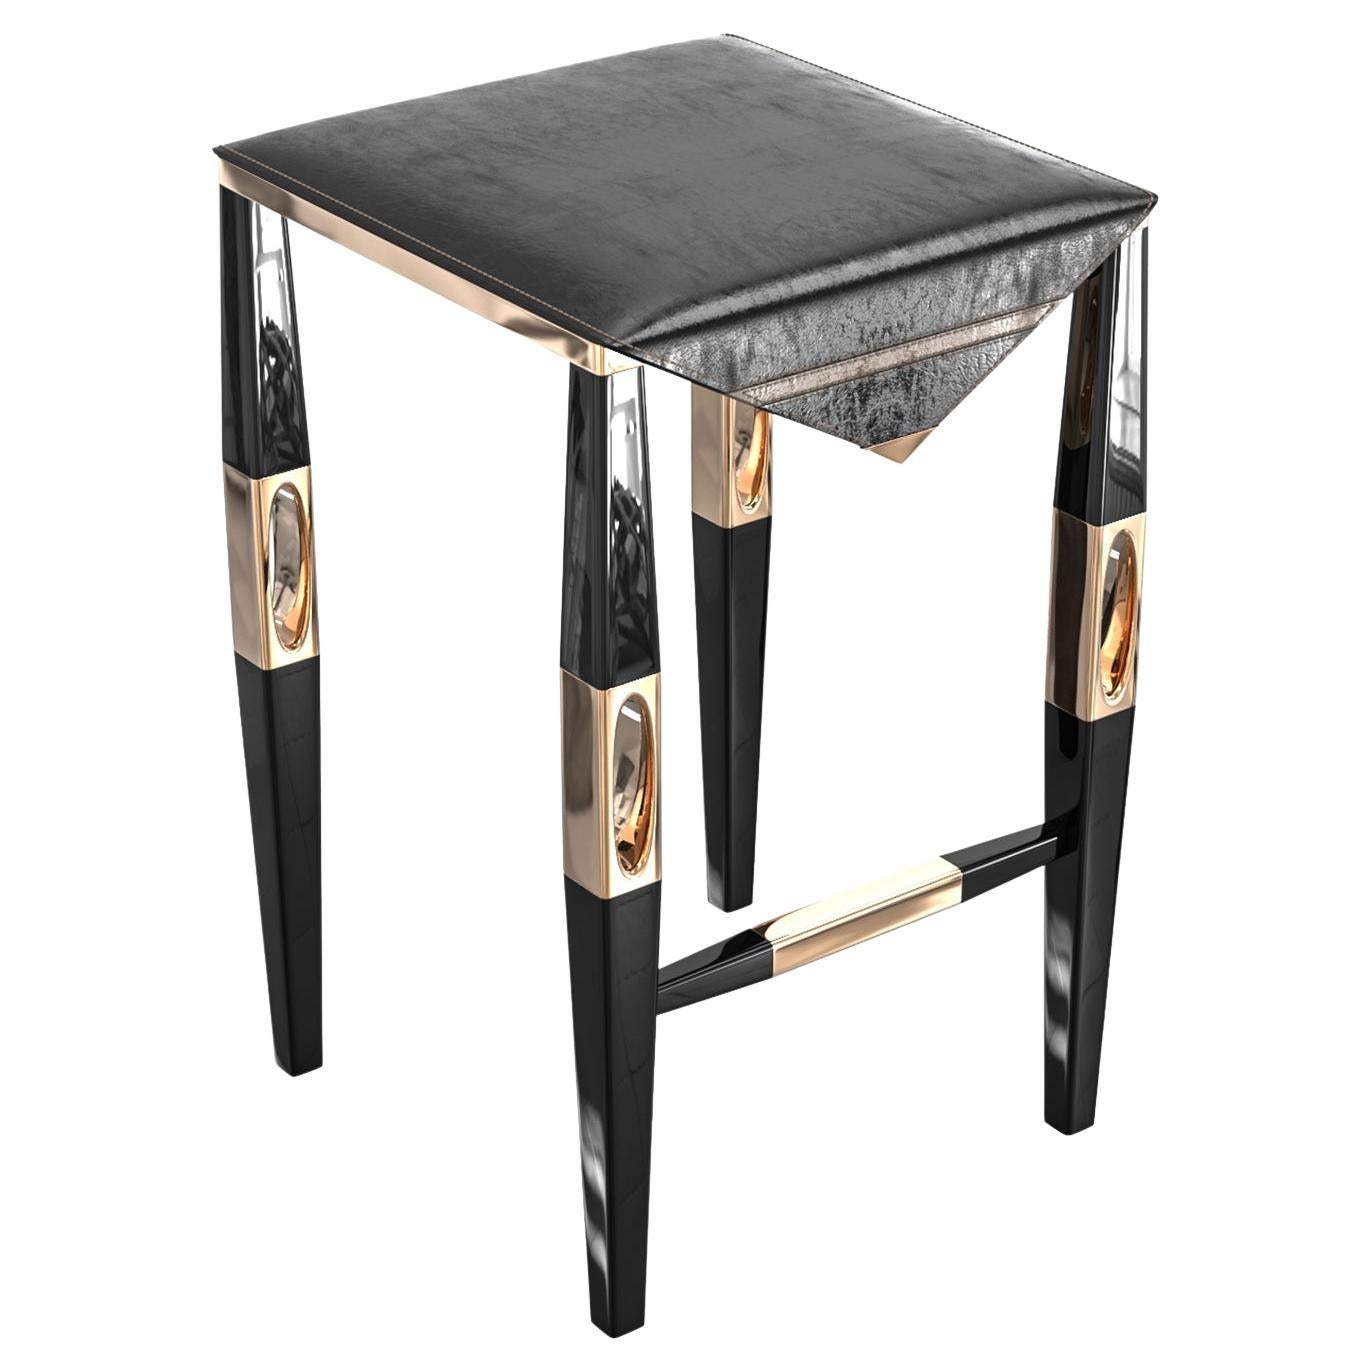 "Celebre" Bar Stool with Stainless Steel and Bronze, Istanbul For Sale